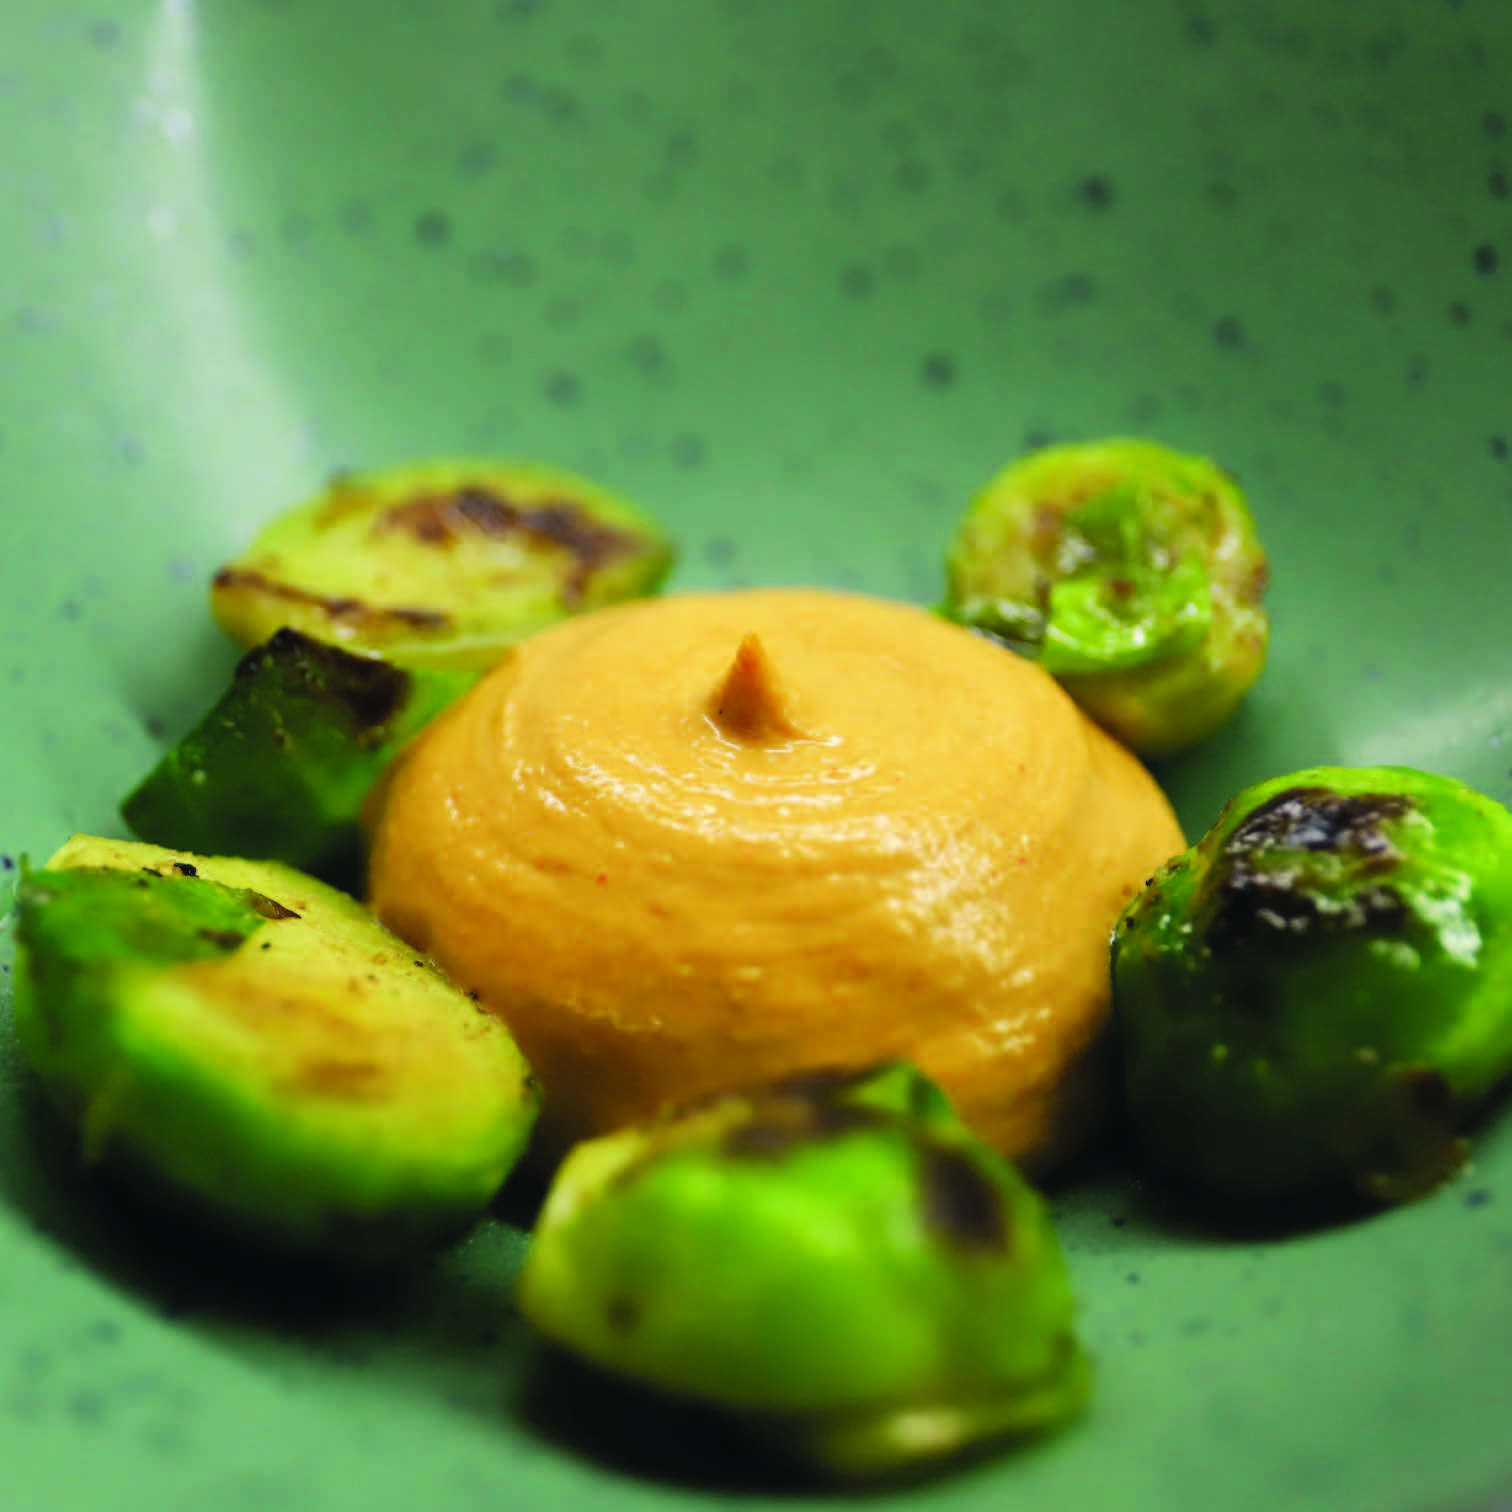 Culinary Arts: Pan-fried brussels sprouts with spicy smoked pepper aioli